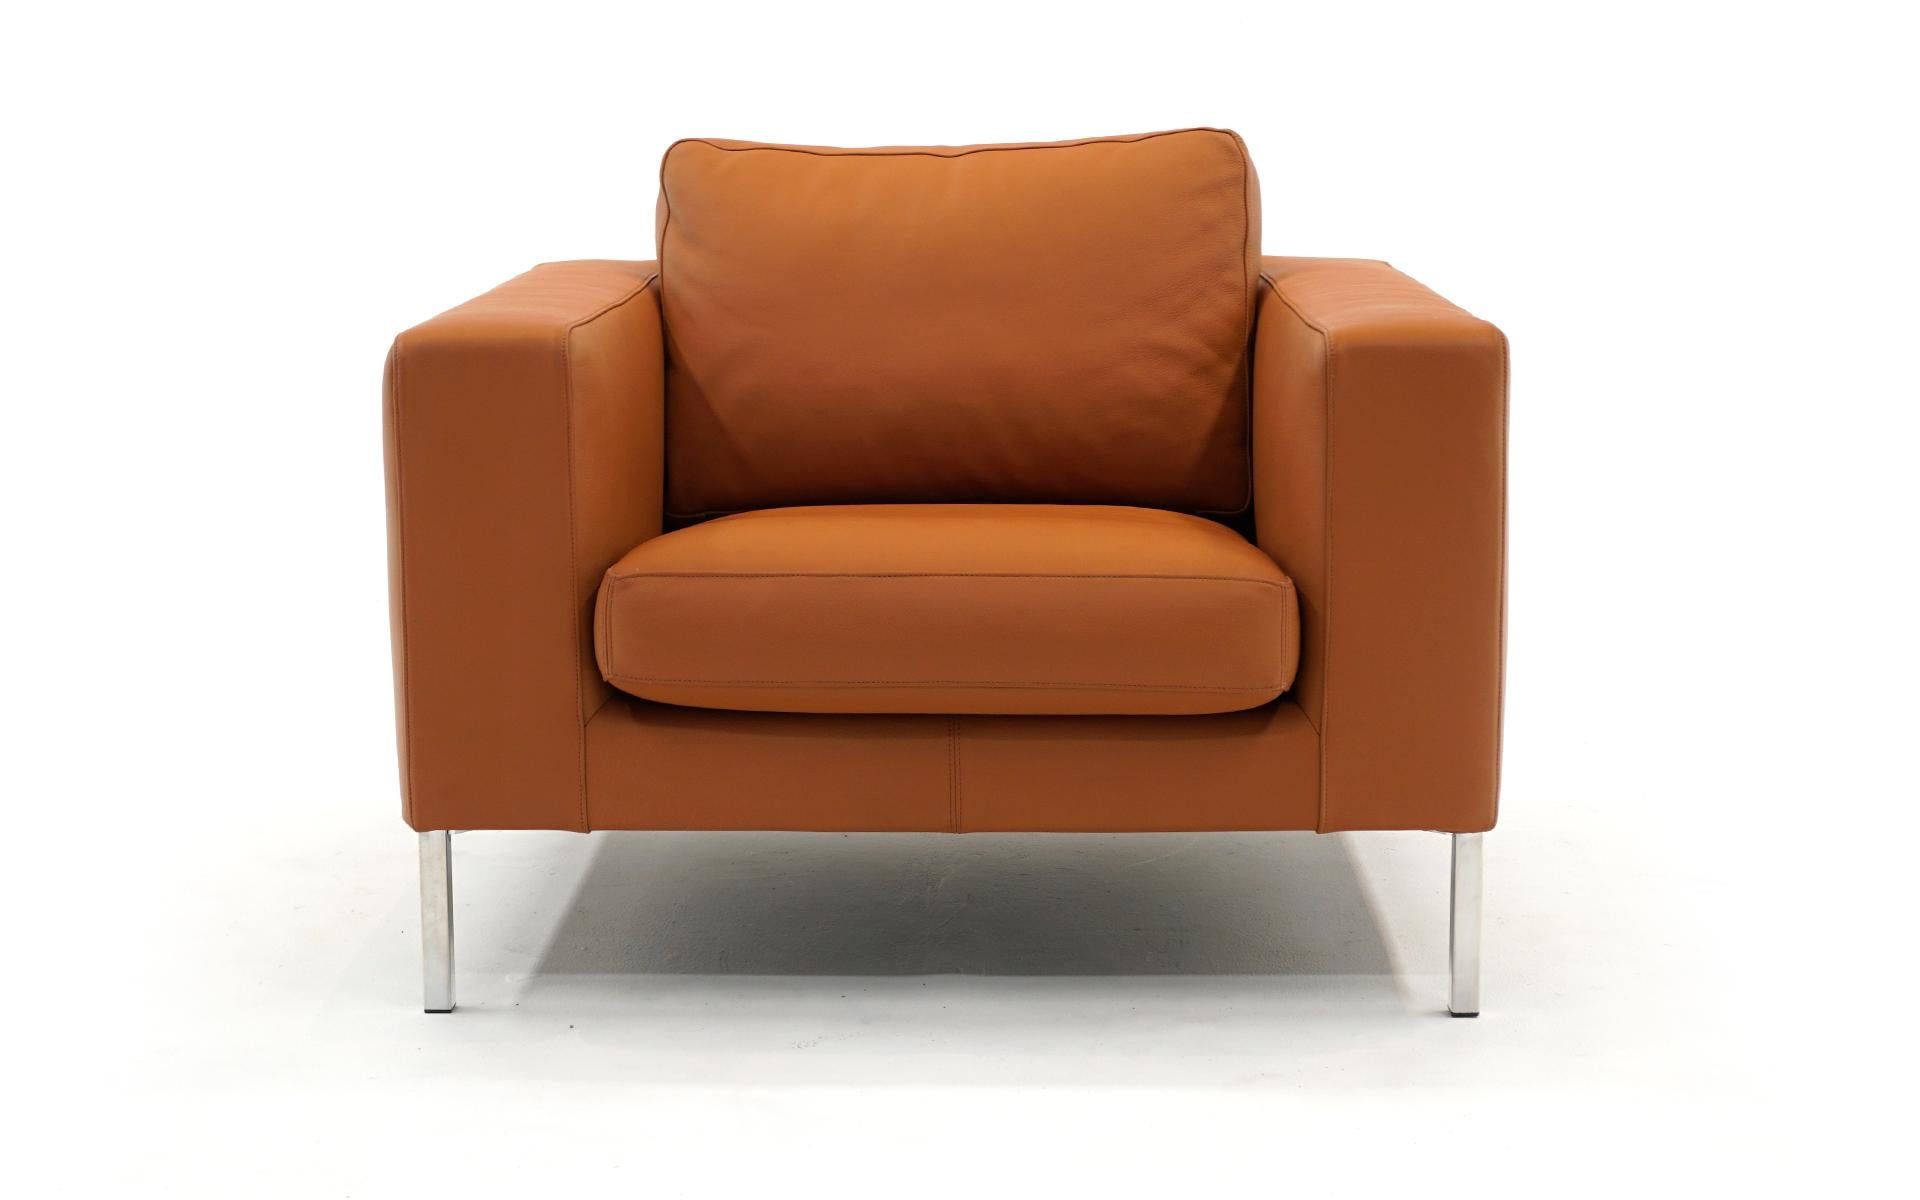 Modern Bensen Neo Lounge Chair in Cognac Leather & Chrome Frame by Niels Bendtsen